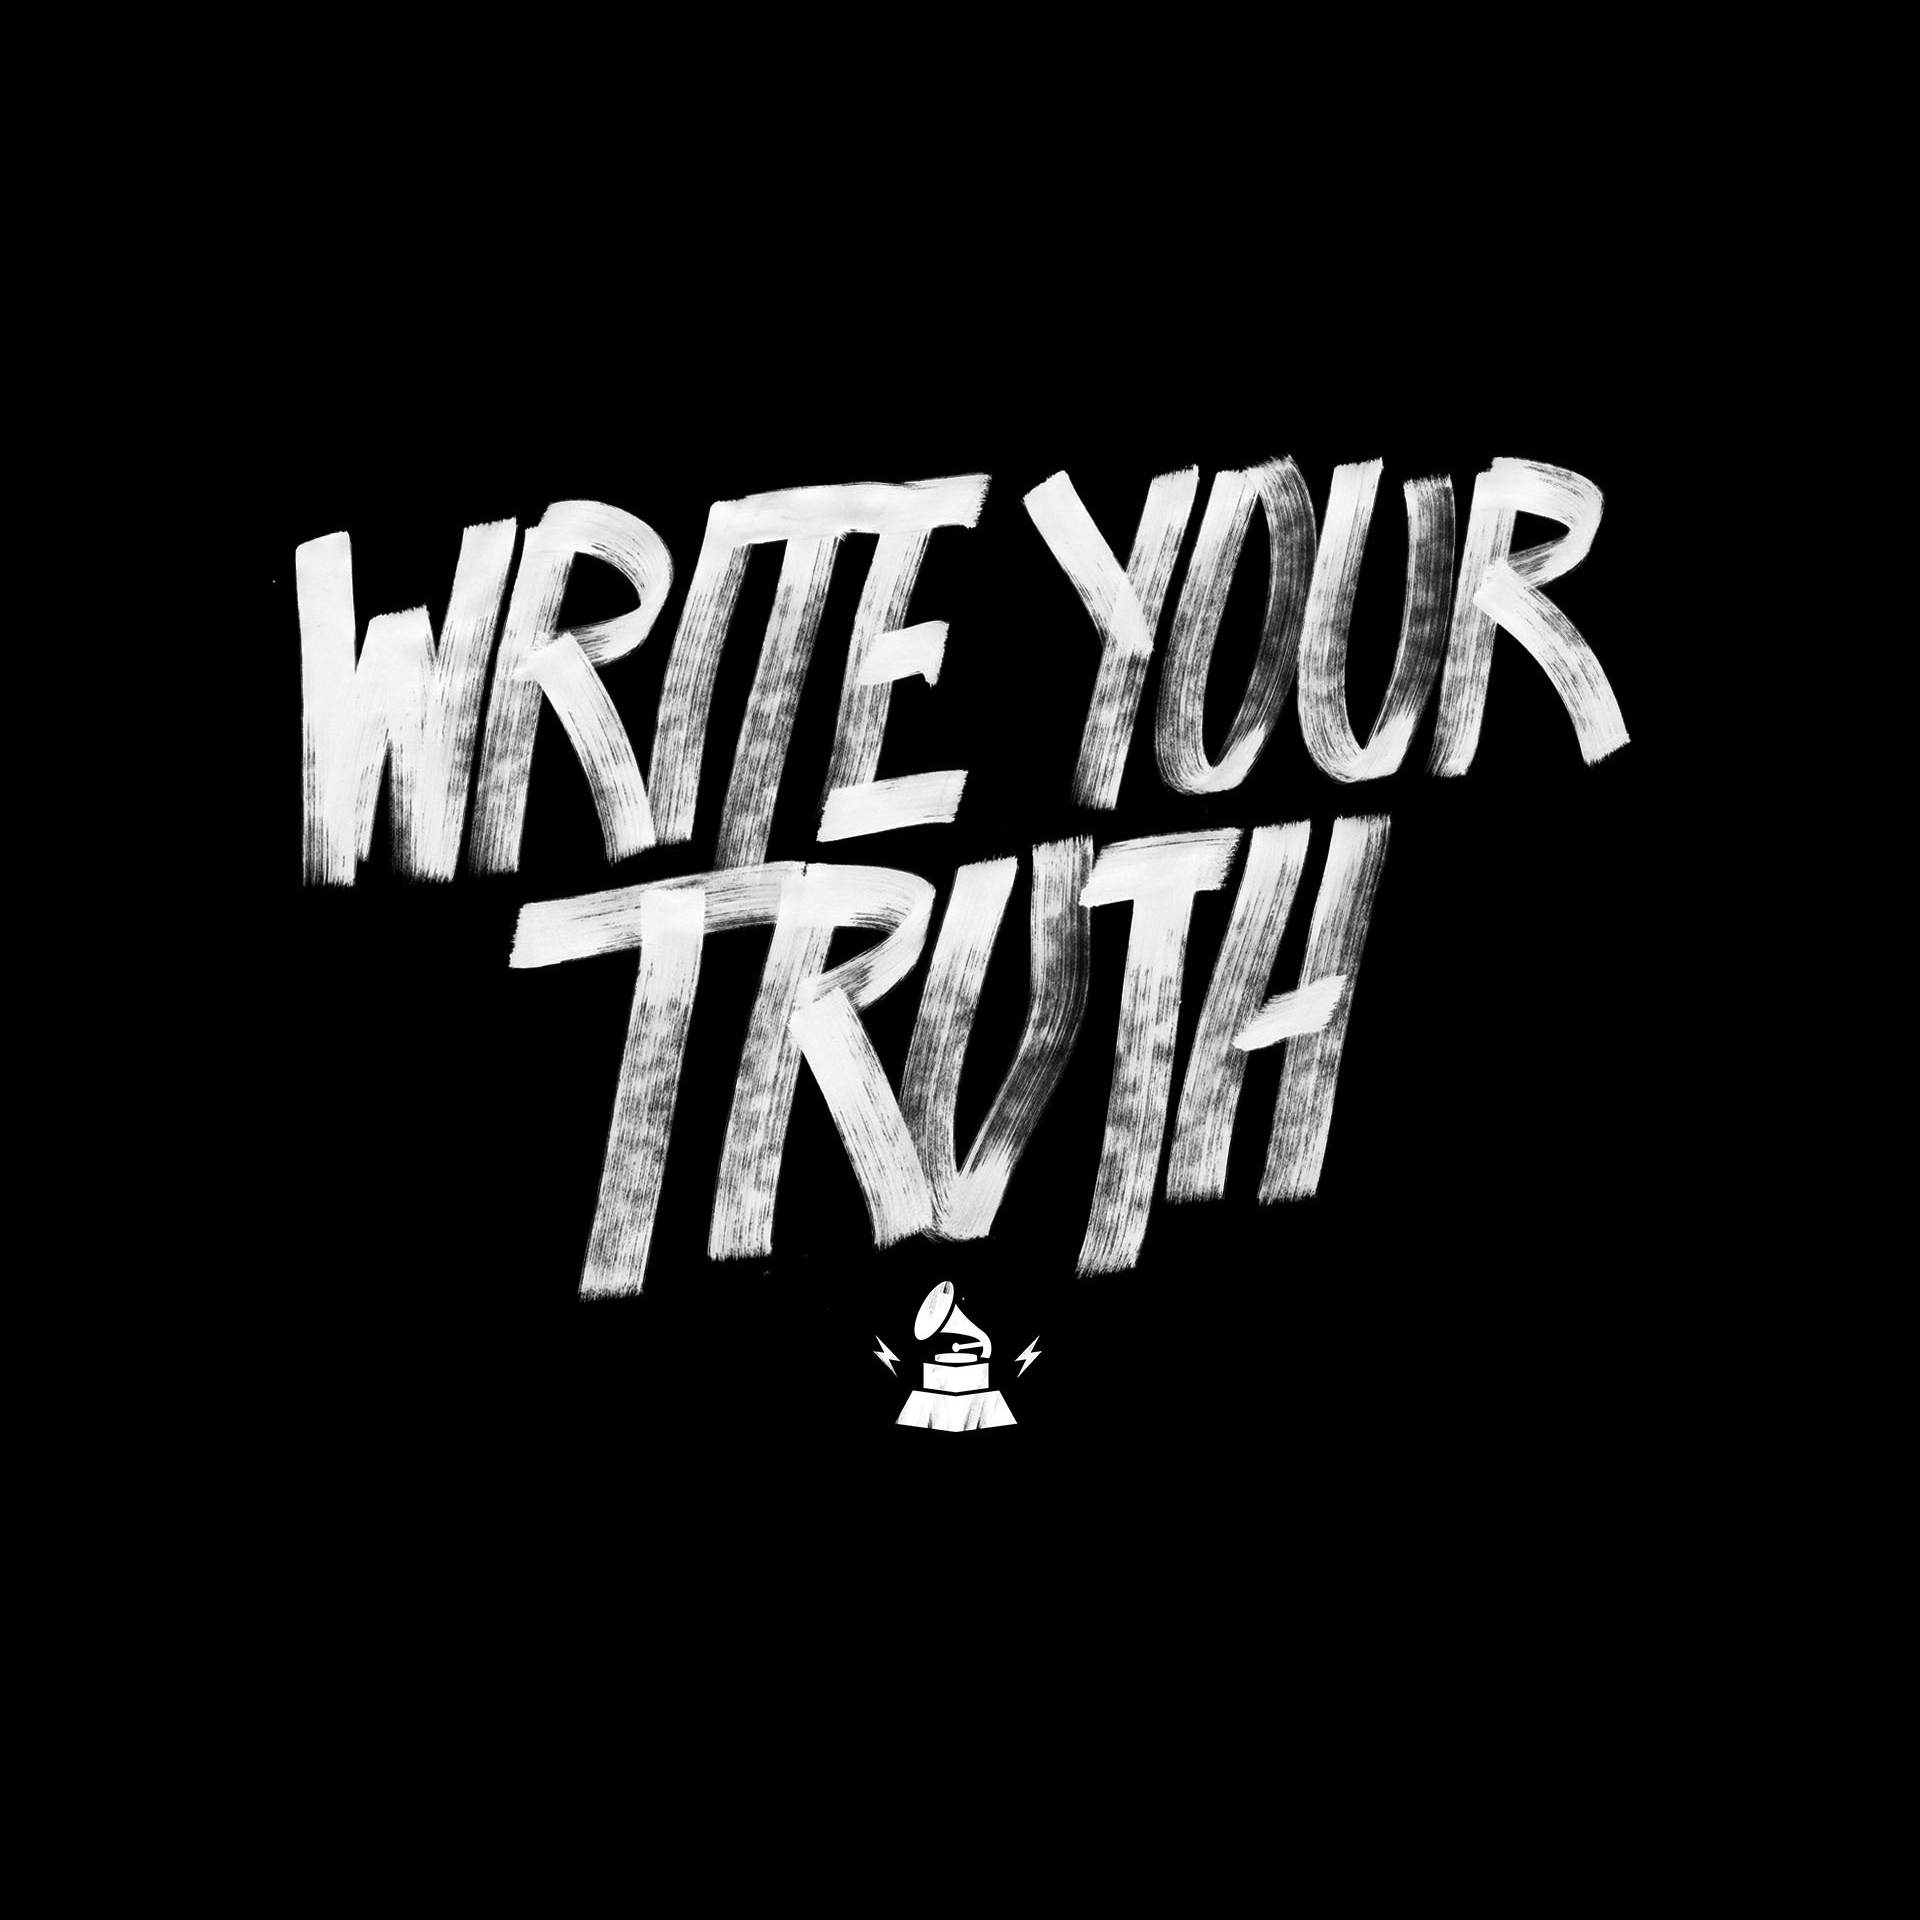 The image features a black background with bold, white, brushstroke text that reads "WRITE YOUR TRUTH." Below the text, there's a small, white icon of a pen nib with rays emanating from it.